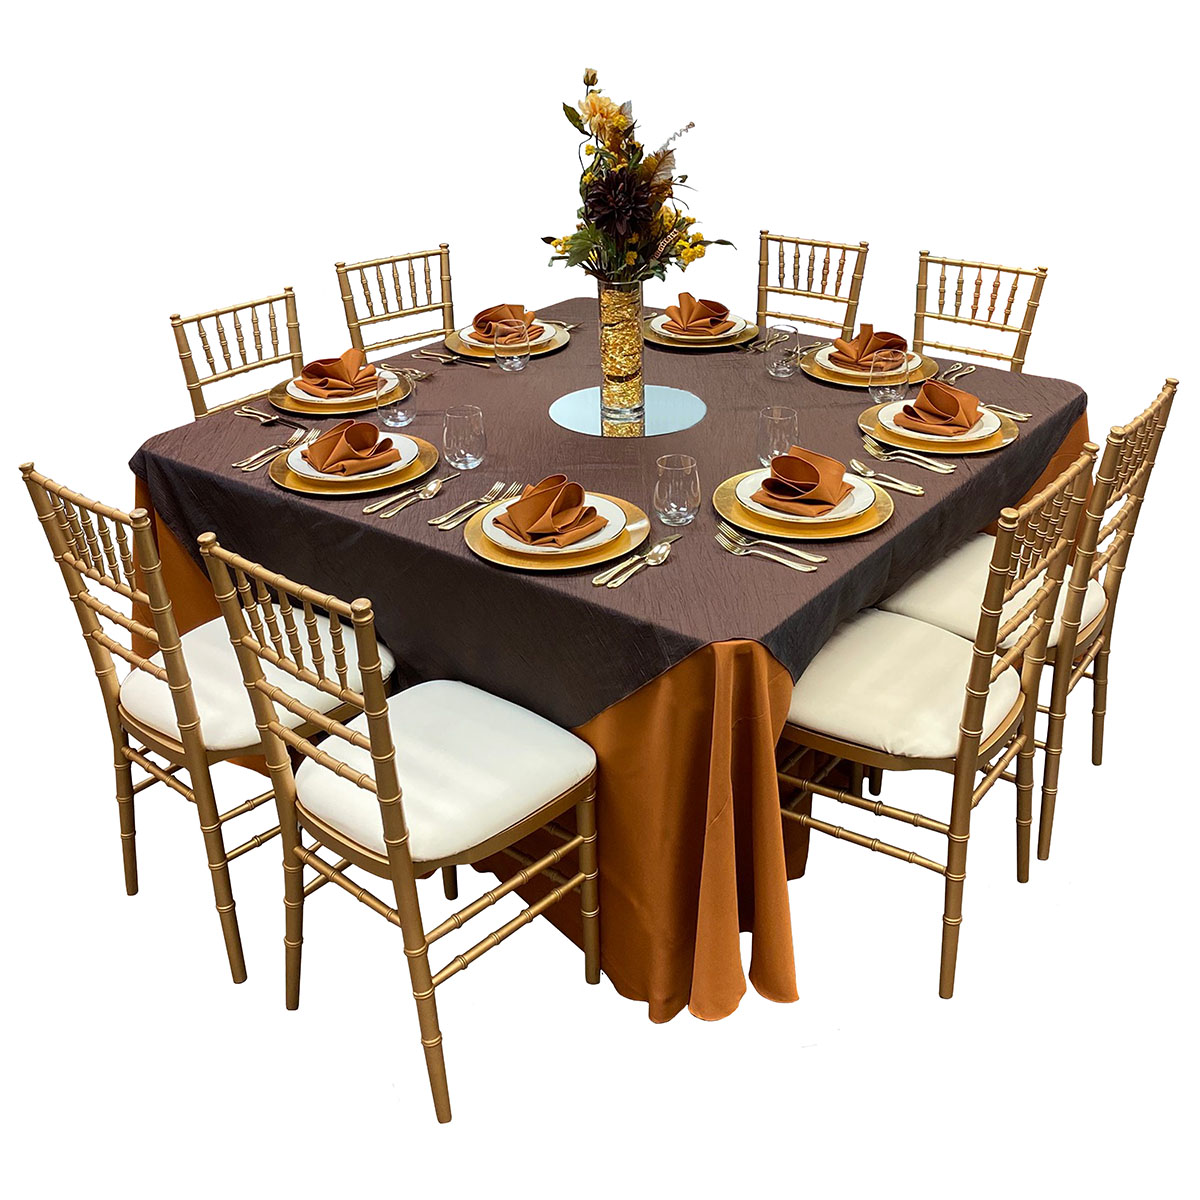 Table 60x60 Wood Topped With 120" Round Copper Solid Tablecover, 81x81 Krinkle Brown Topper, Brushed Gold Chargers, Beige With Gold Band China, Gold Plated Flatware, Stemless Wine White 17oz Glasses, Copper Solid Napkins, 4x12 Cylinder Vase, 14" Round Mirror (Flowers Not Included)